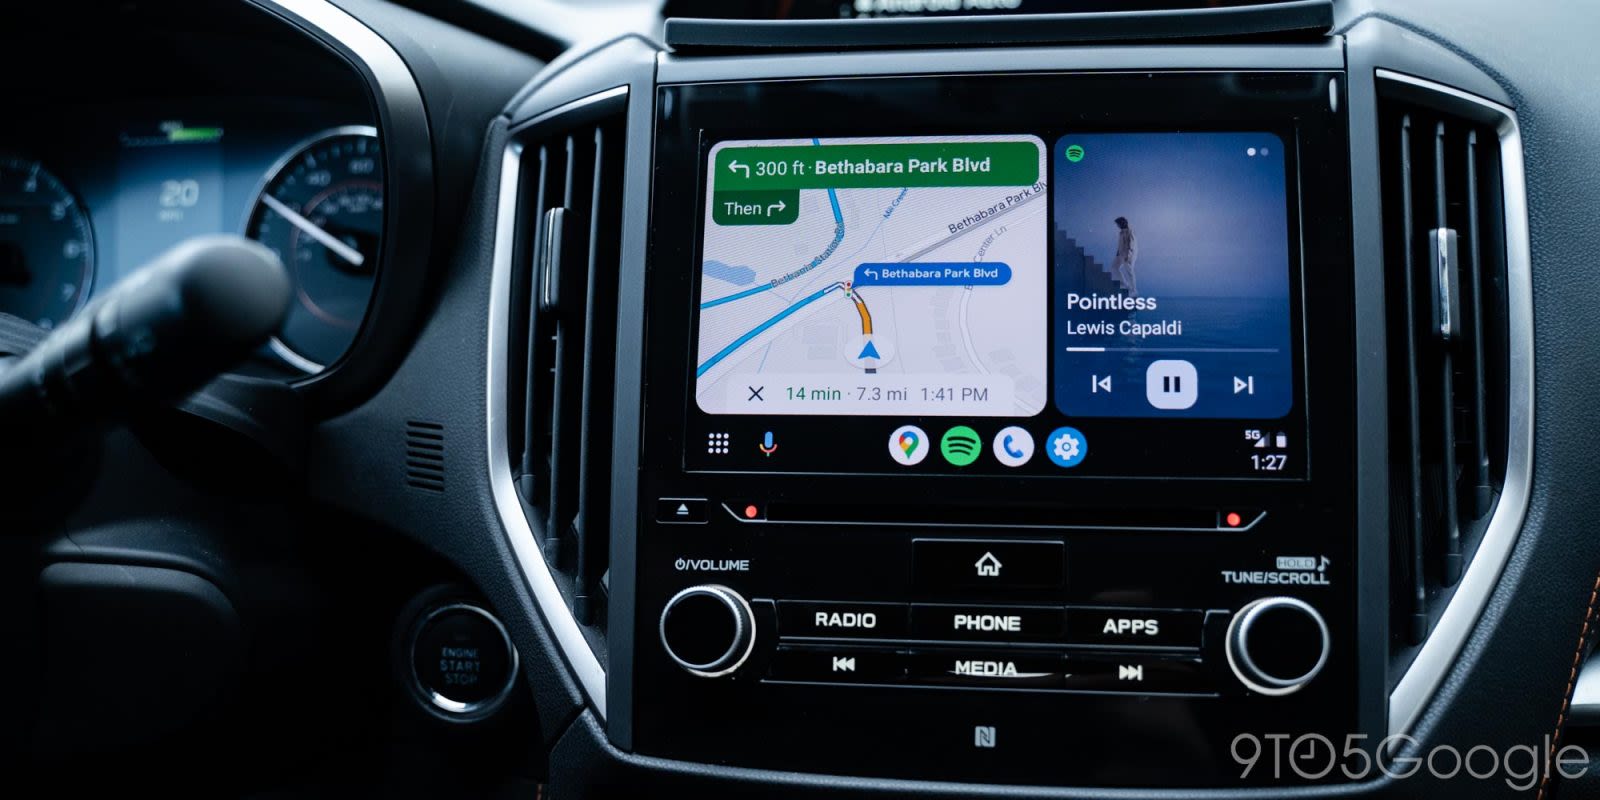 Android Auto appears to be adding support for controlling your car's radio